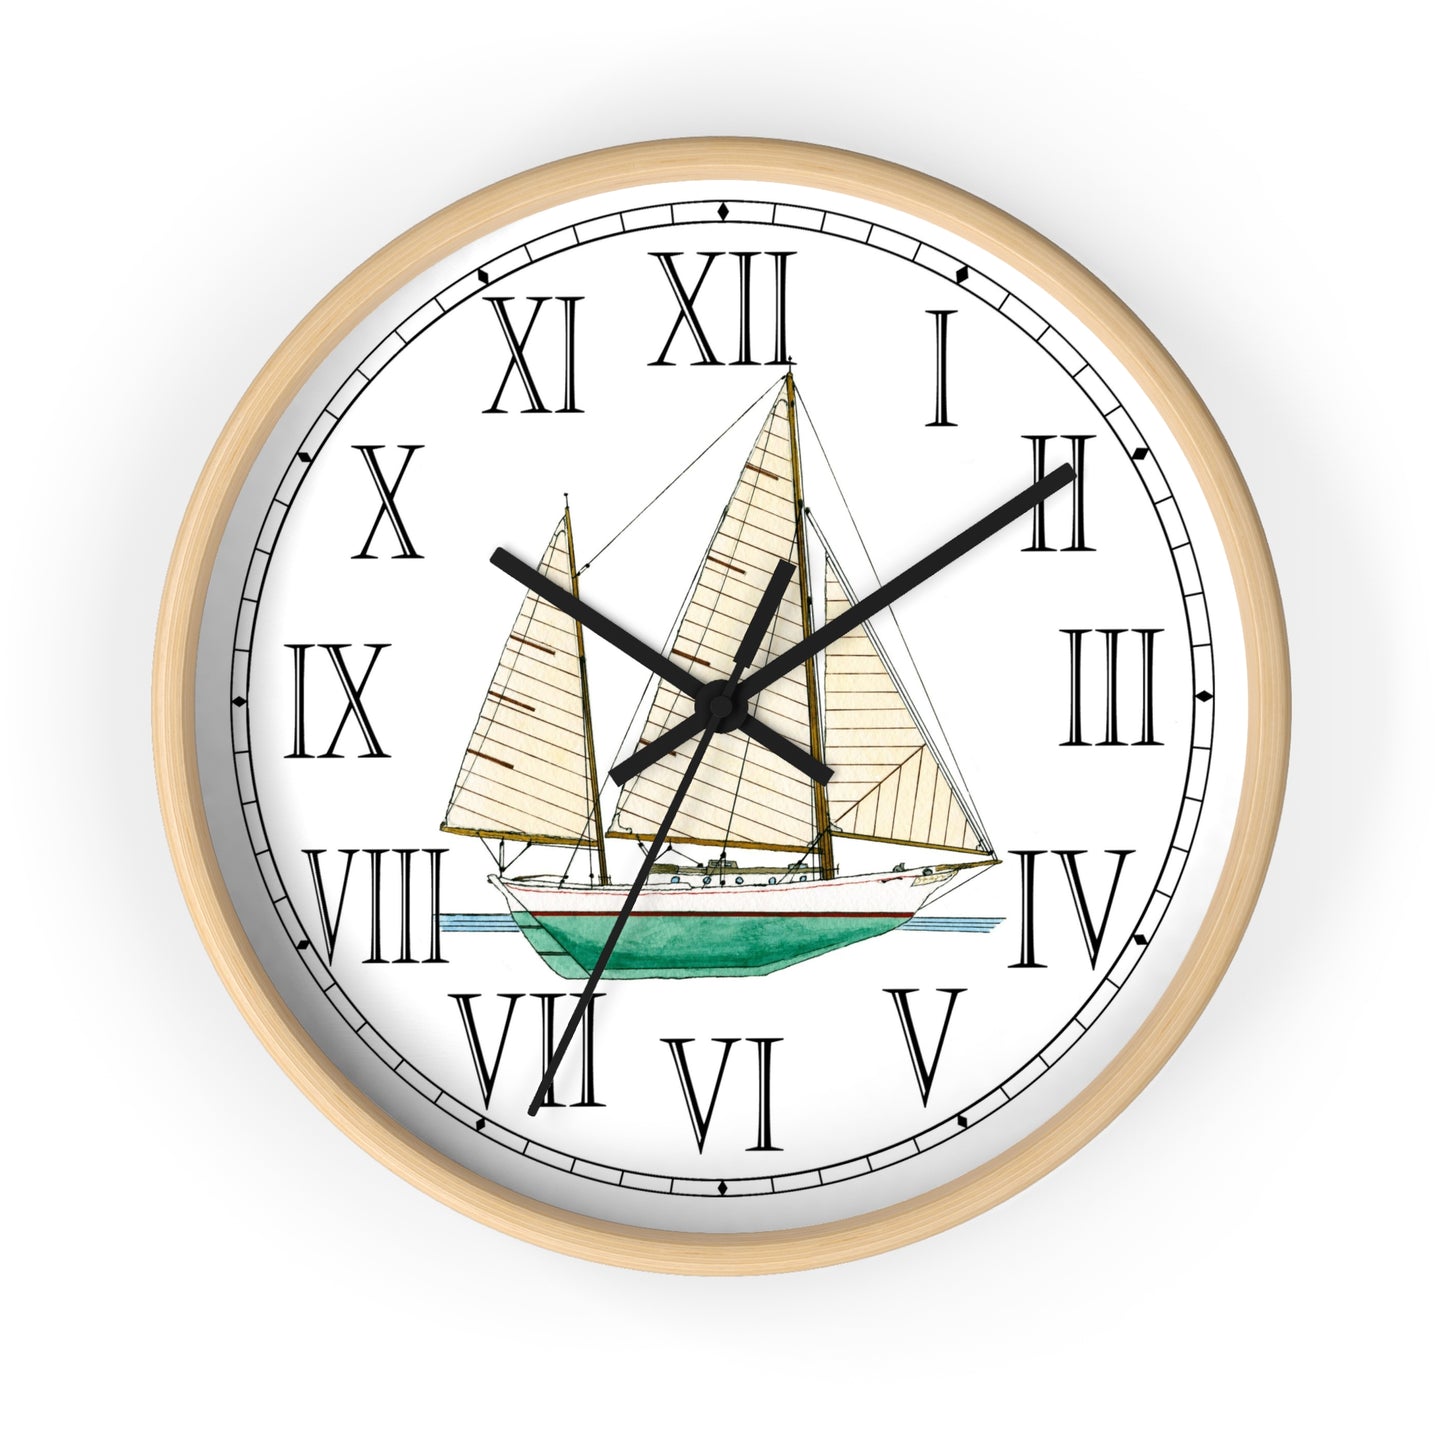 The Radiant Star cruising ketch has a flat transom, an outboard rudder and clipper bow. Sailing enthusiasts will enjoy using this clock on both land and sea. Great gift for your favorite sailor!   The boat design in the clock is a reproduction of an original watercolor by Lee M. Buchanan. This clock features Roman Numerals and will add a classic and colorful touch to any room in your home.